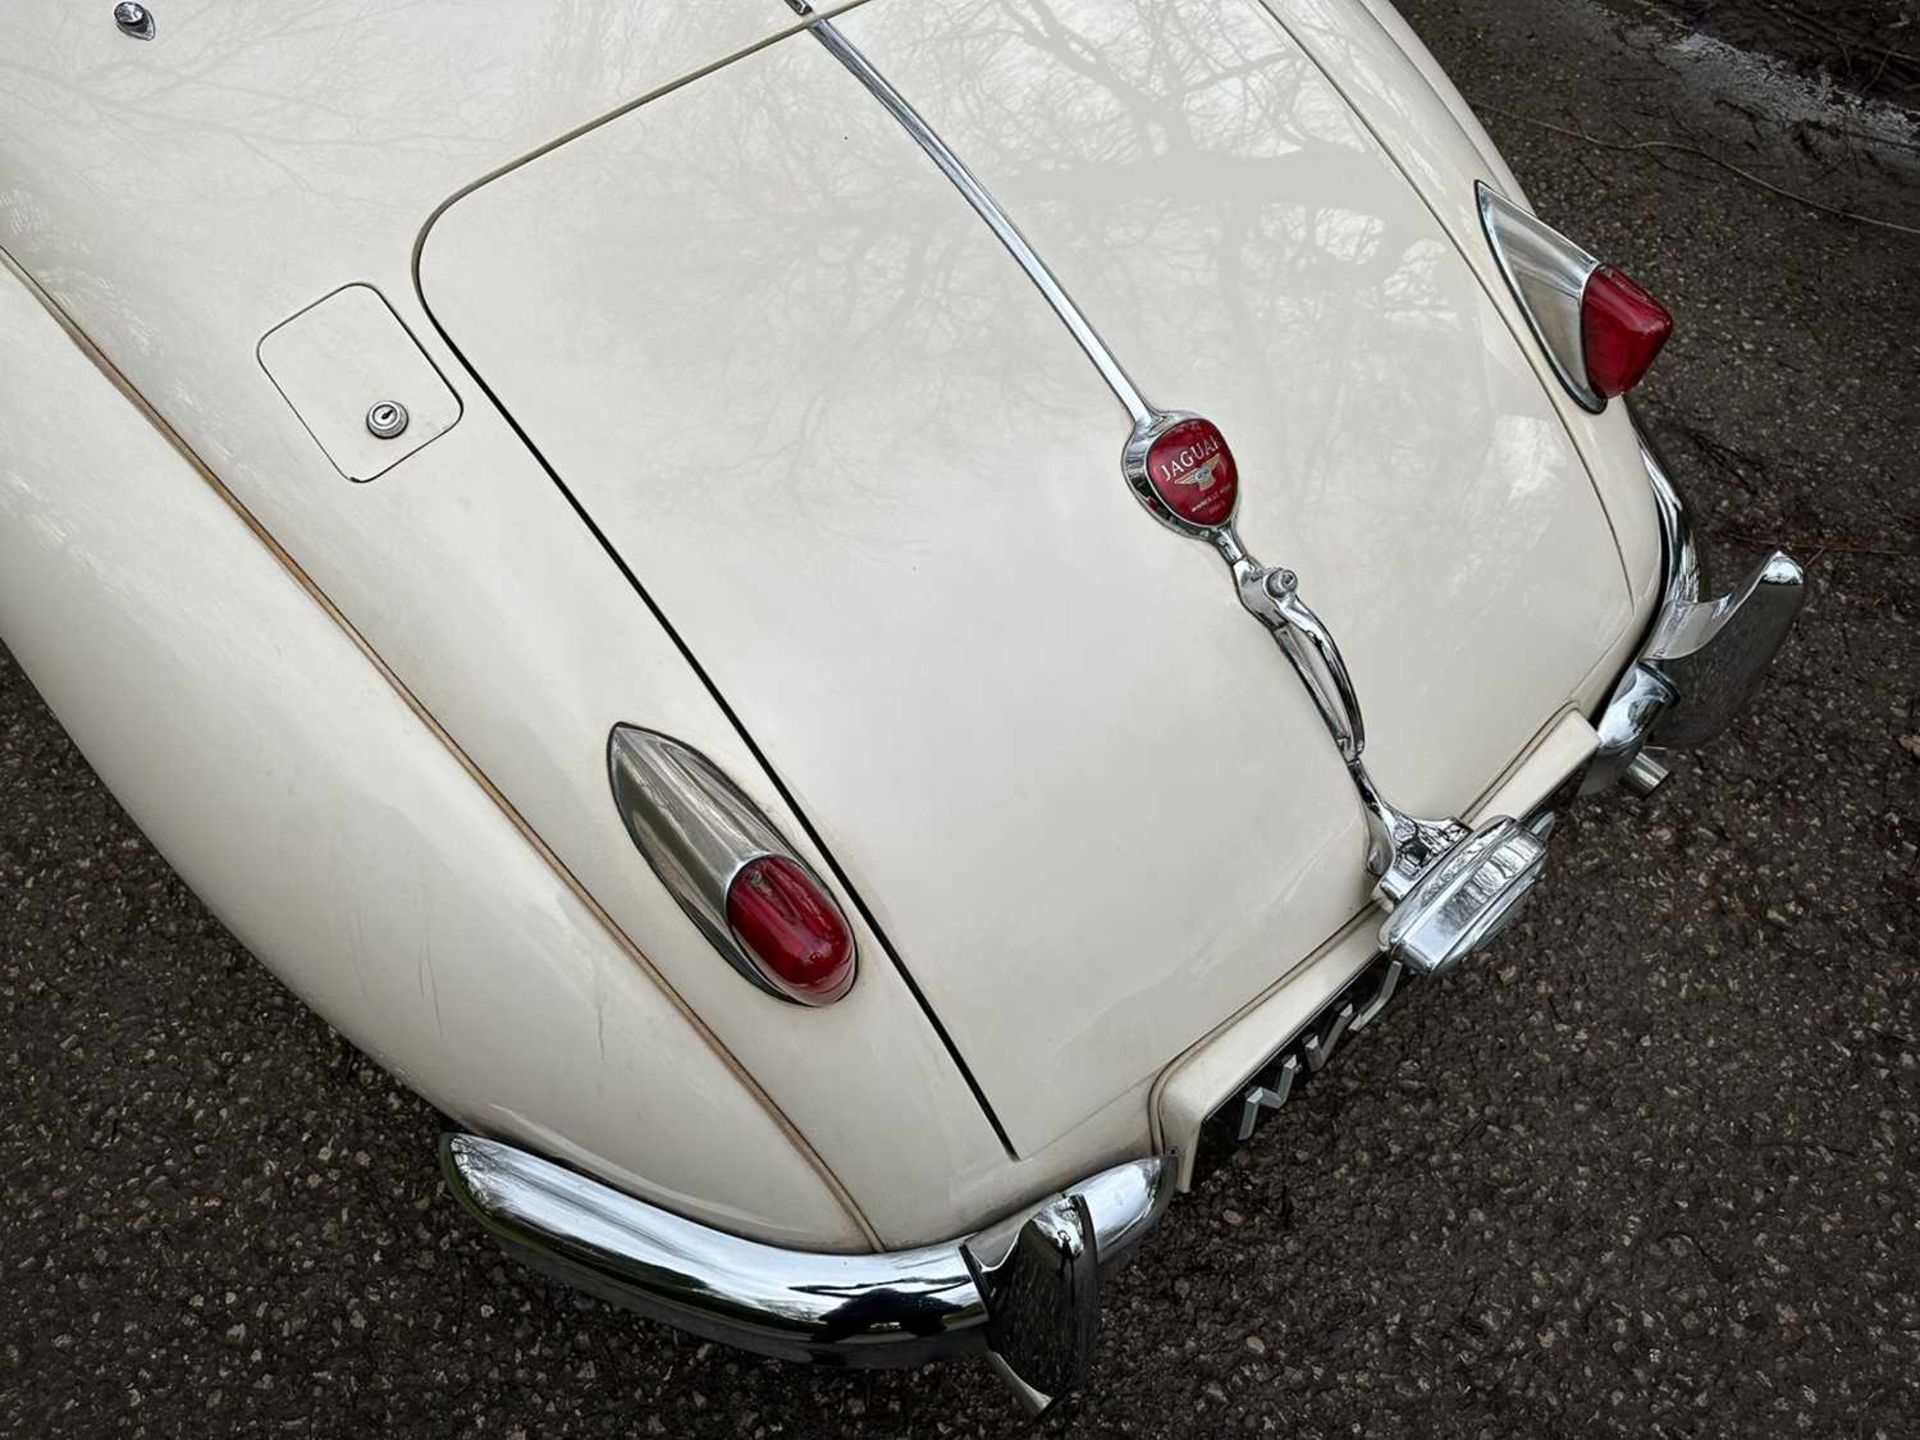 1956 Jaguar XK140 SE Roadster Home-market car. In the same family ownership for 33 years - Image 21 of 81